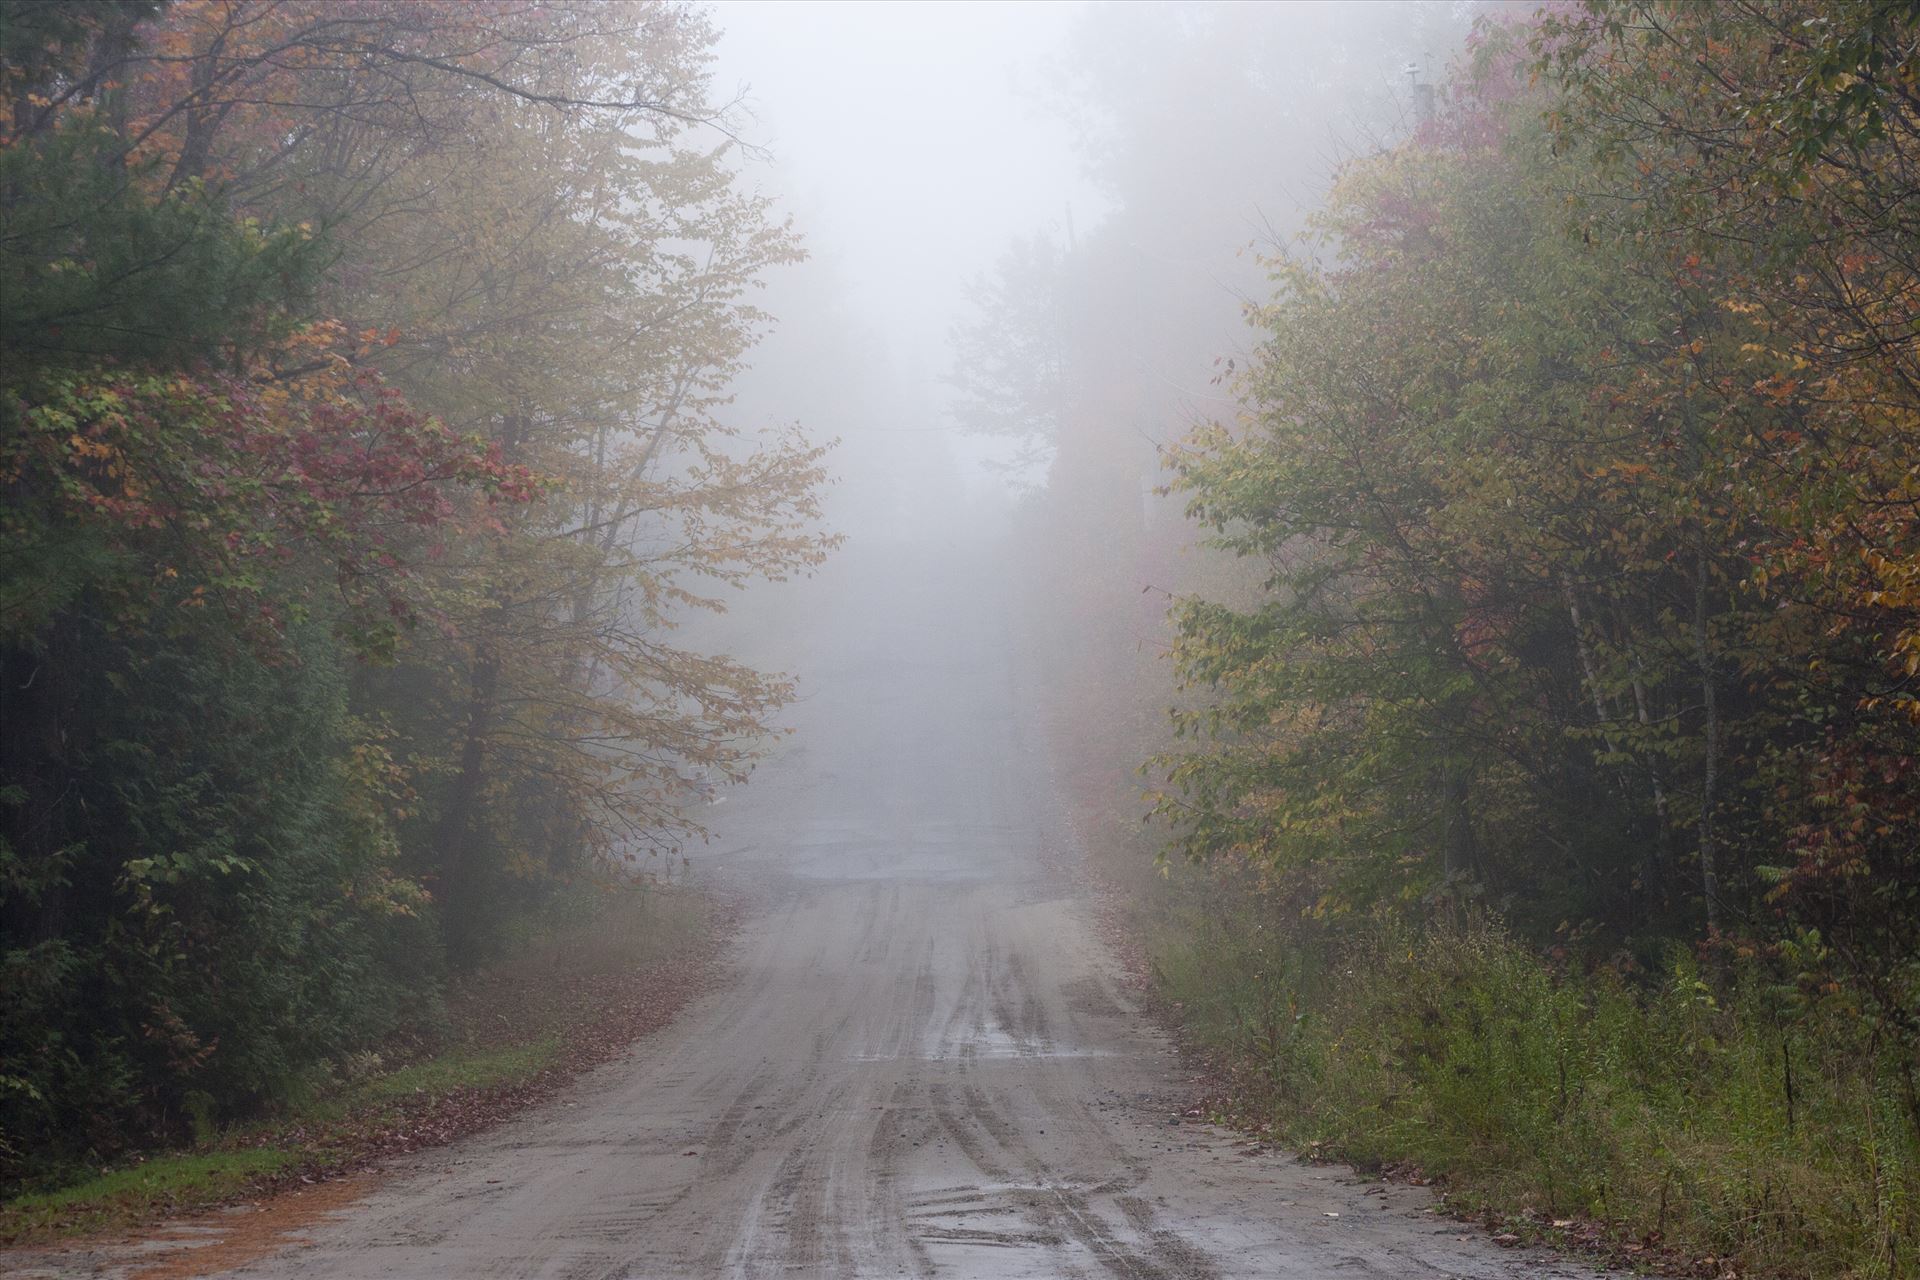 A foggy road - A foggy road with trees on both sides by Inna Ricardo-Lax Photography